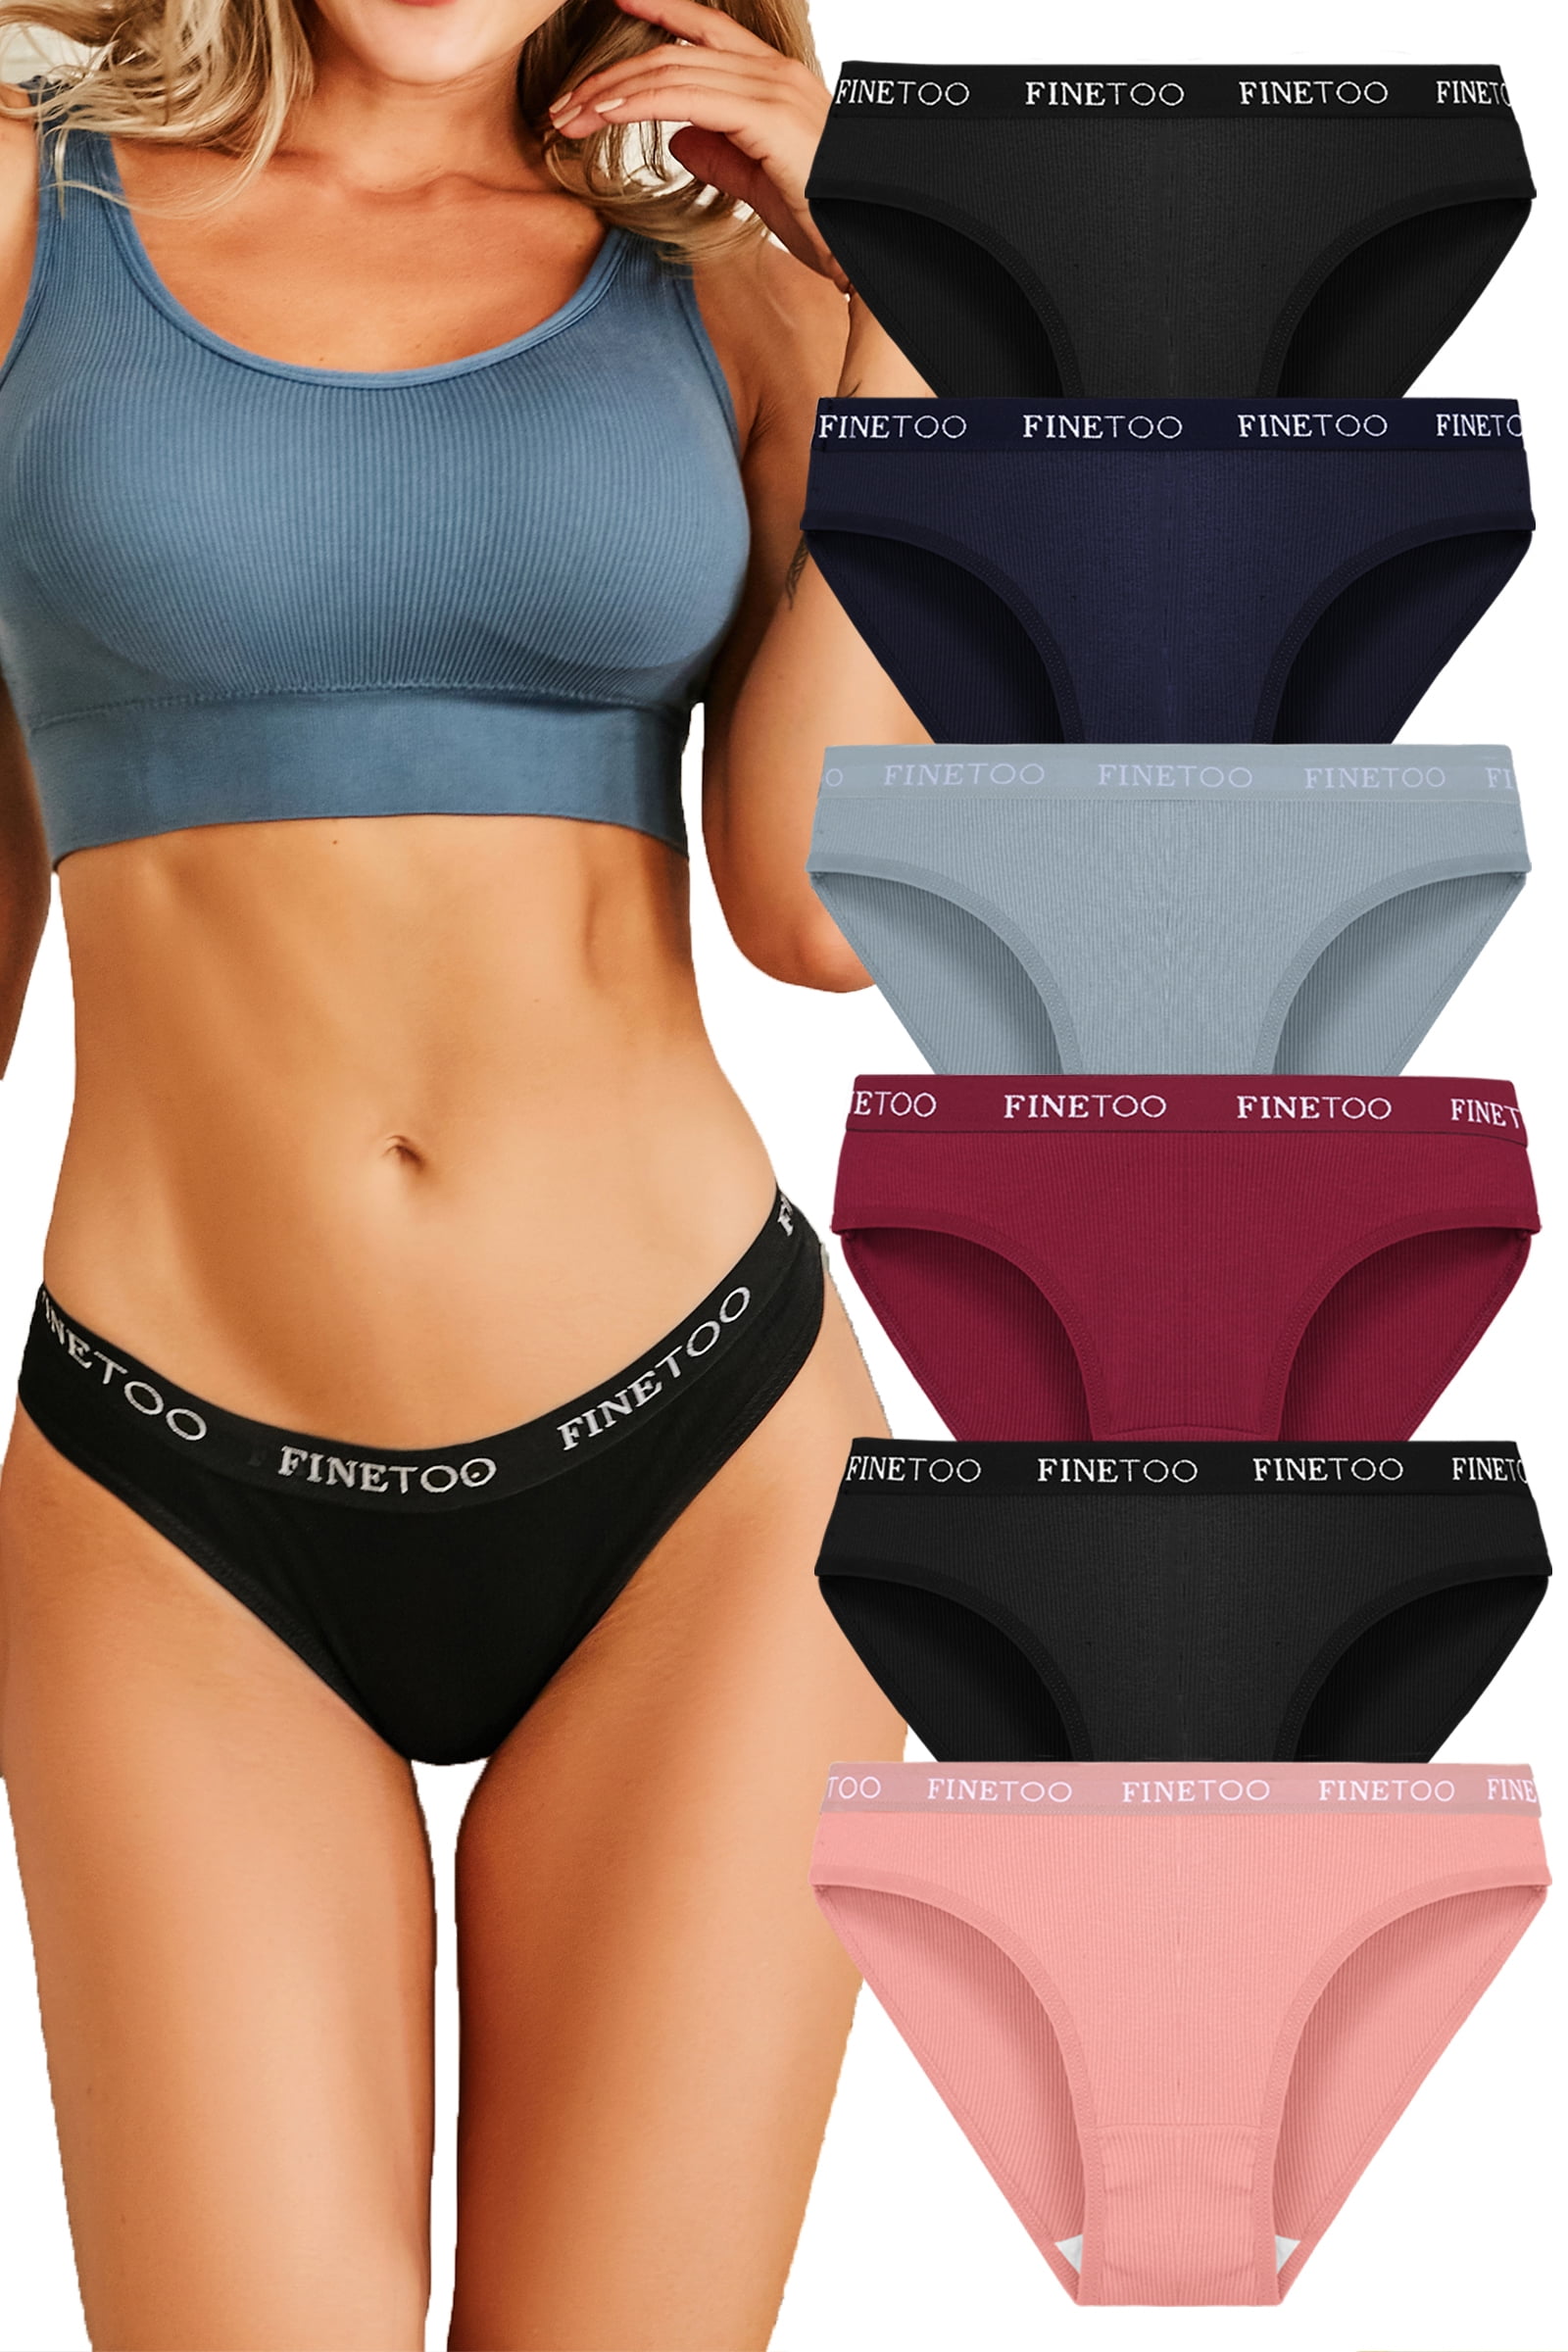 Finetoo Pack Cotton Underwear For Women Cheeky Panties Low Rise